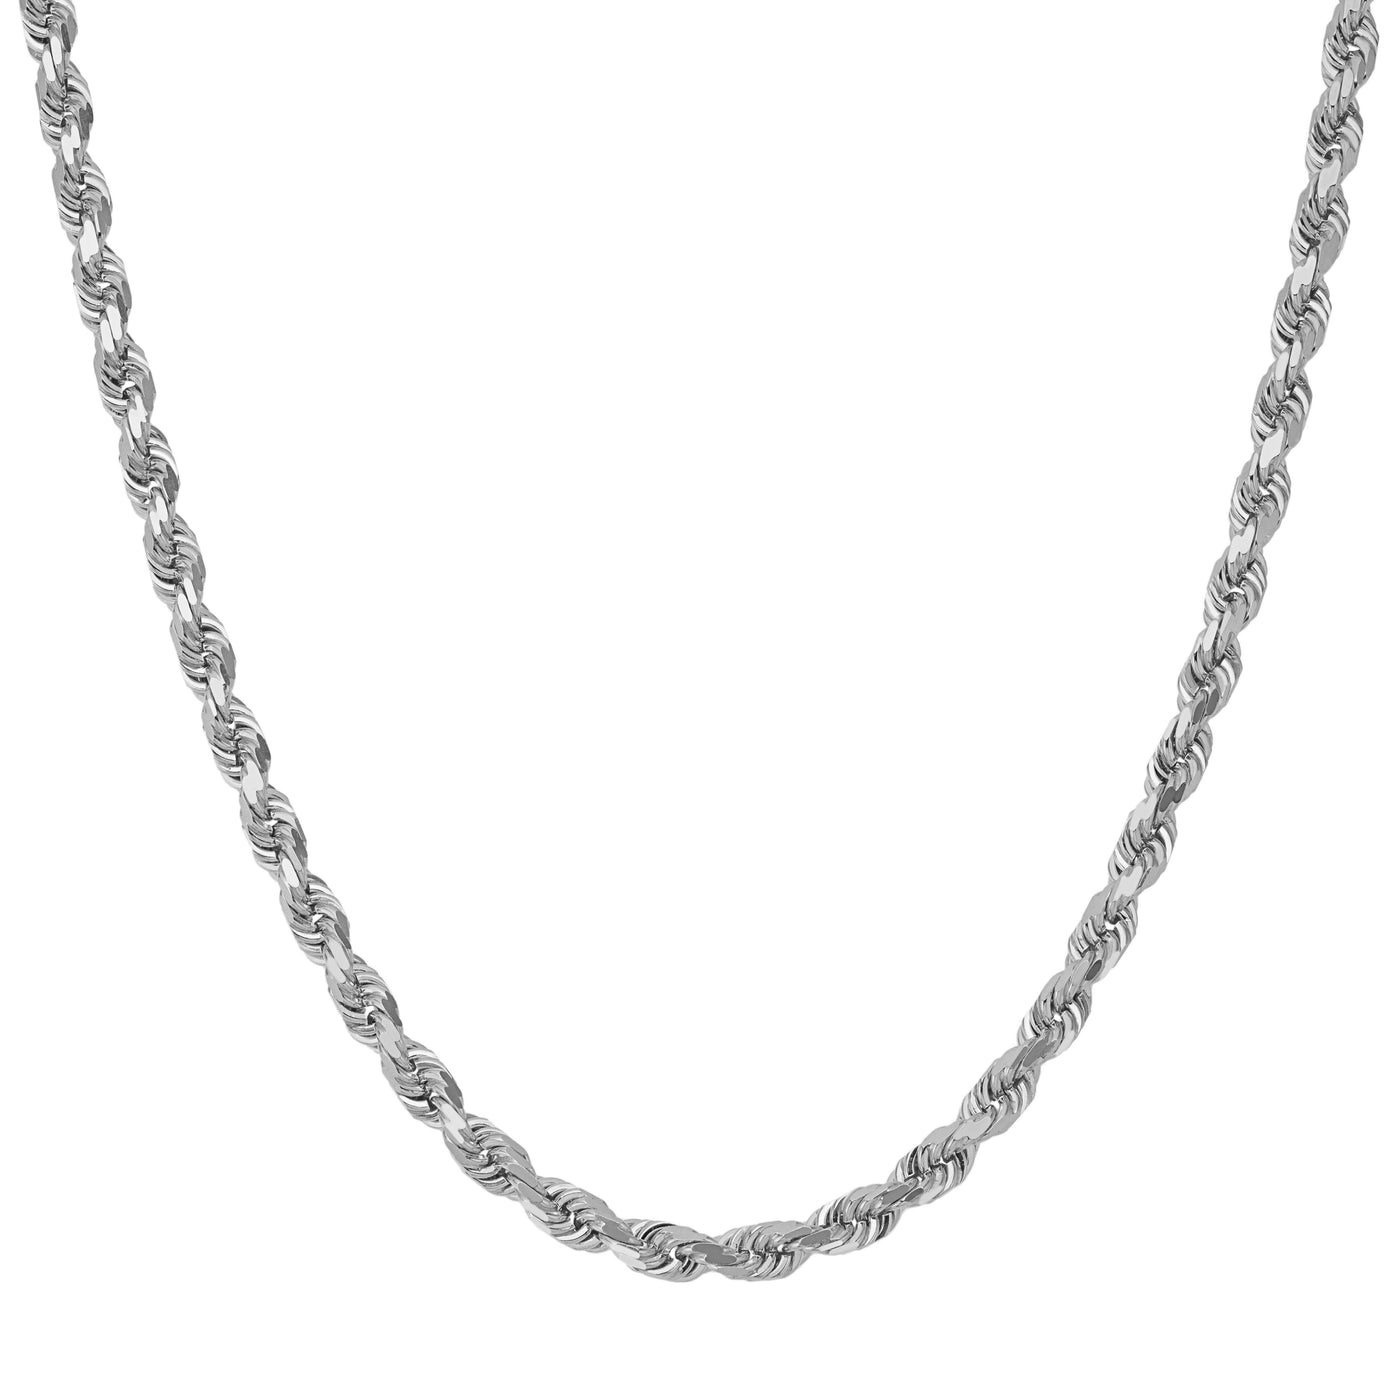 Rope Chain Necklace 14K White Gold - Solid